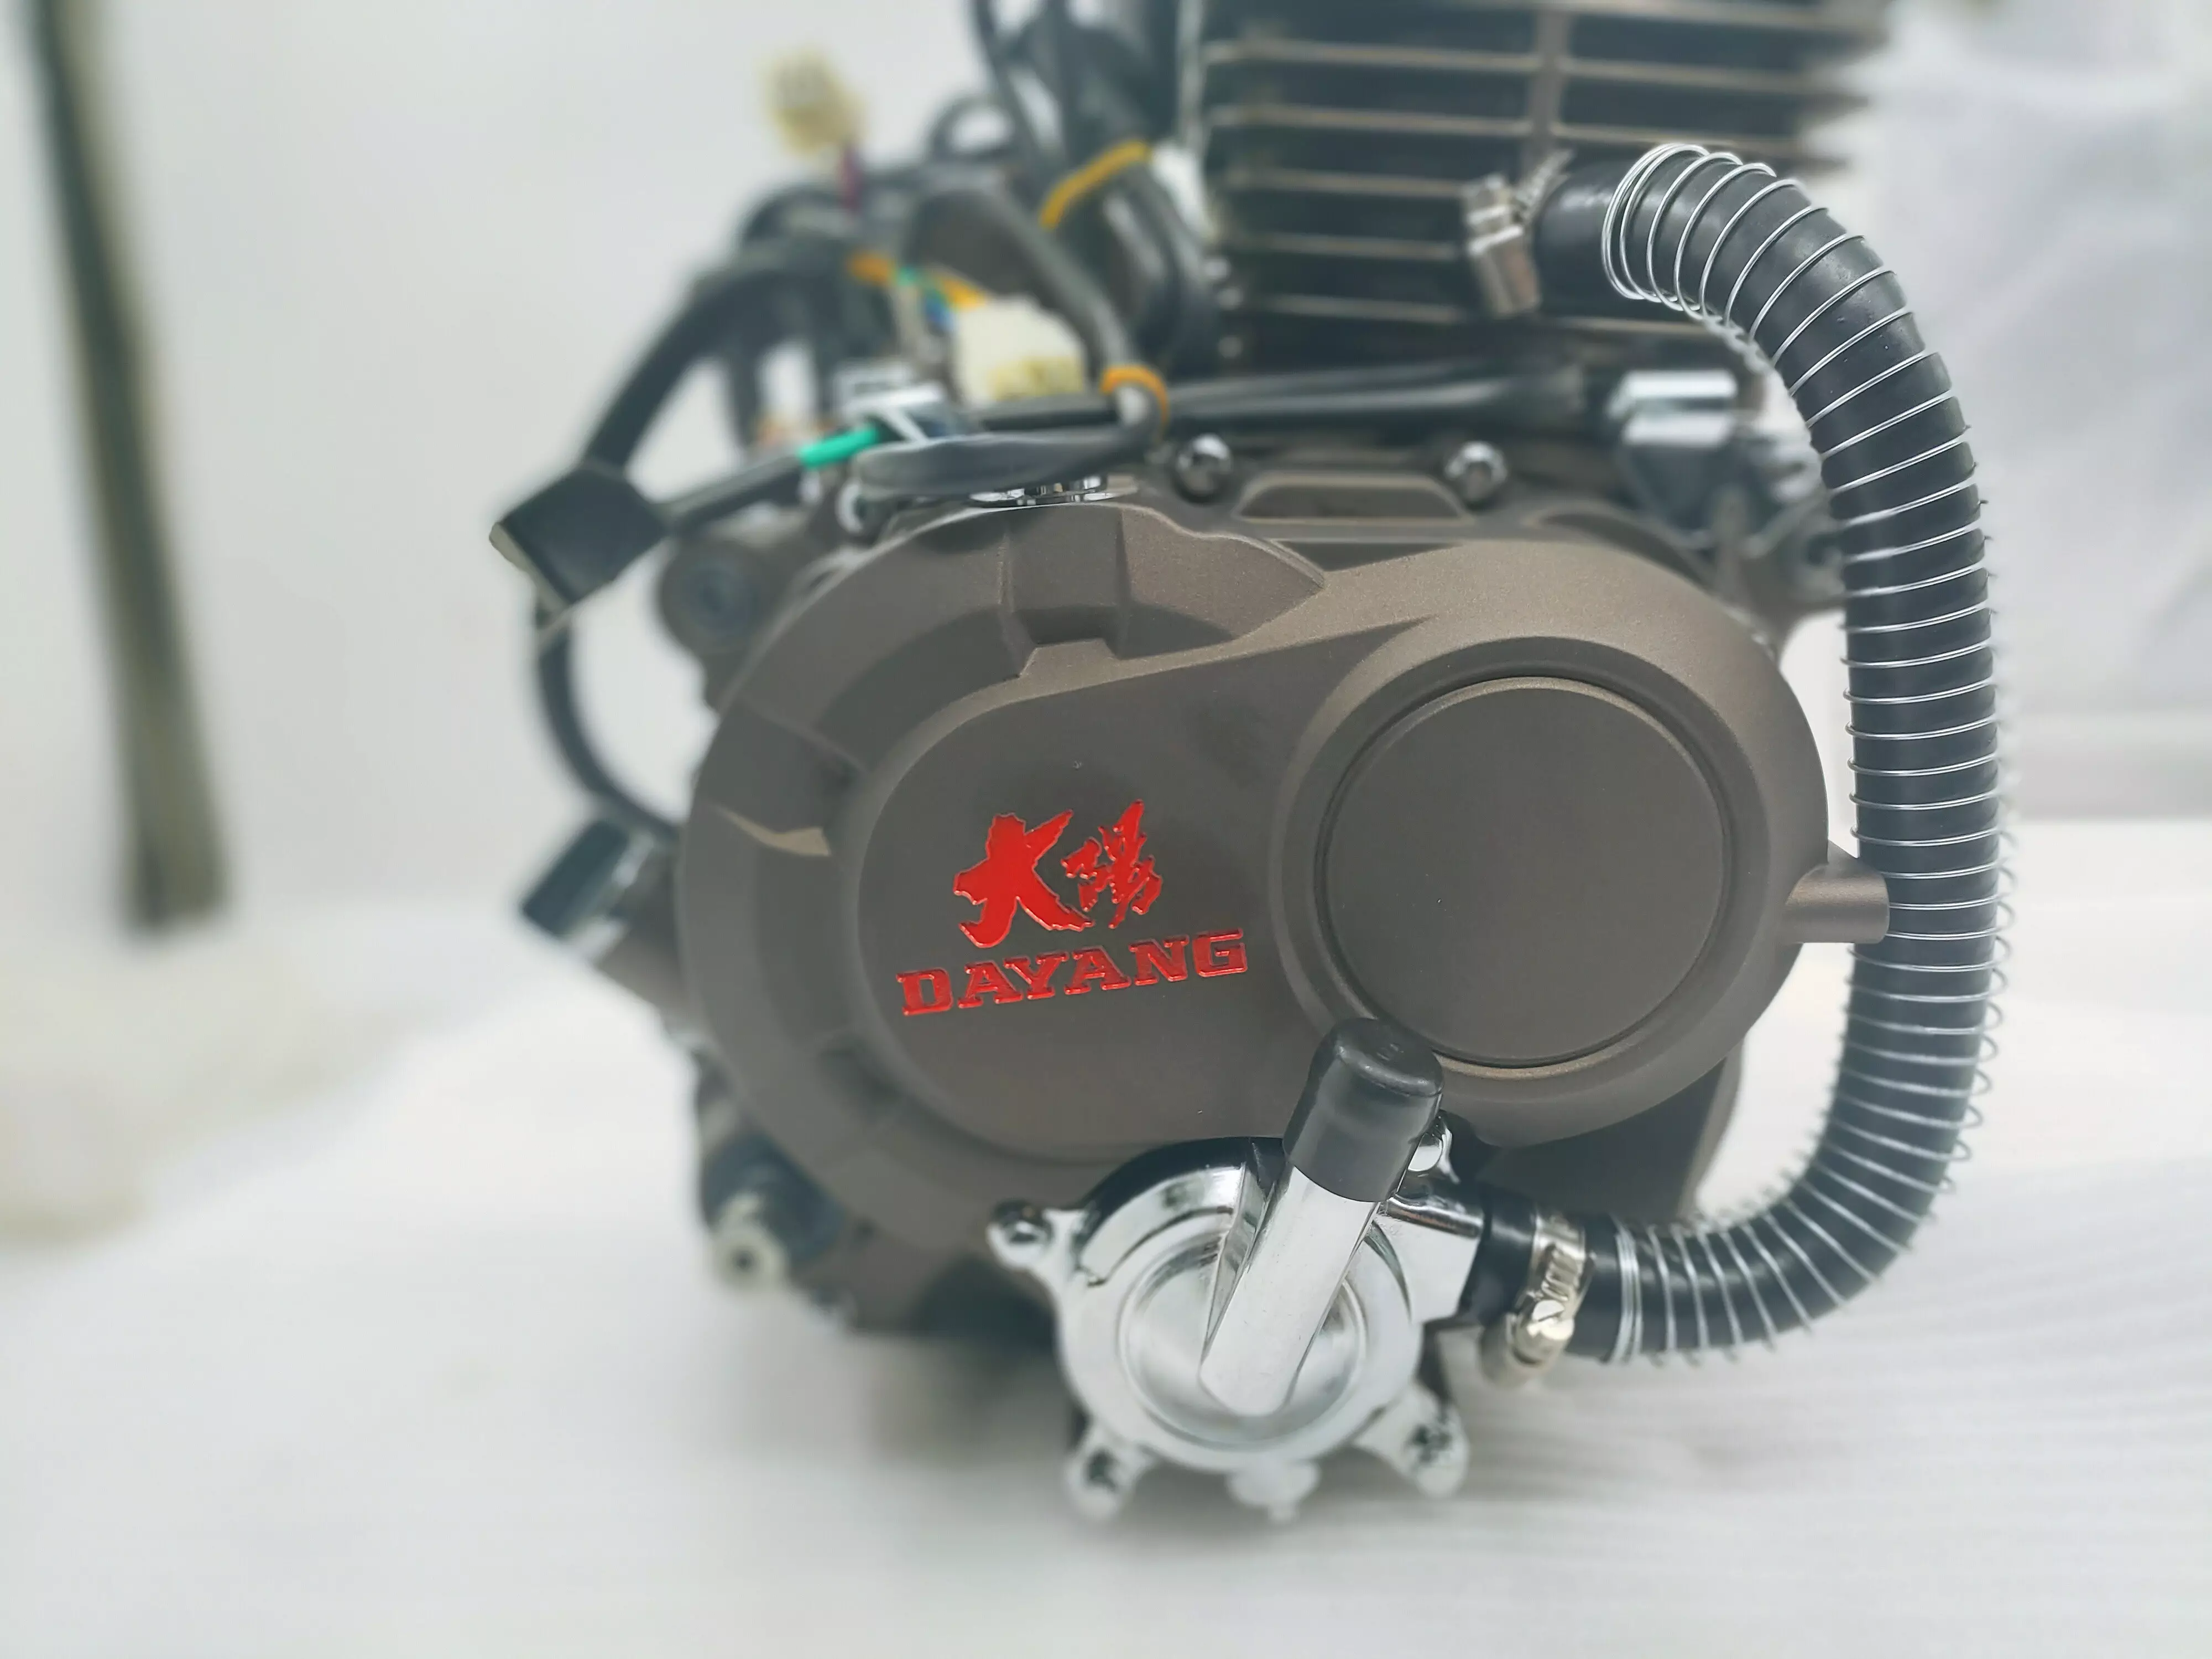 DAYANG 250CC Super Cool Motorcycle Engine Single Cylinder 4 Stroke Style Max Power Origin CCC China Type High Quality